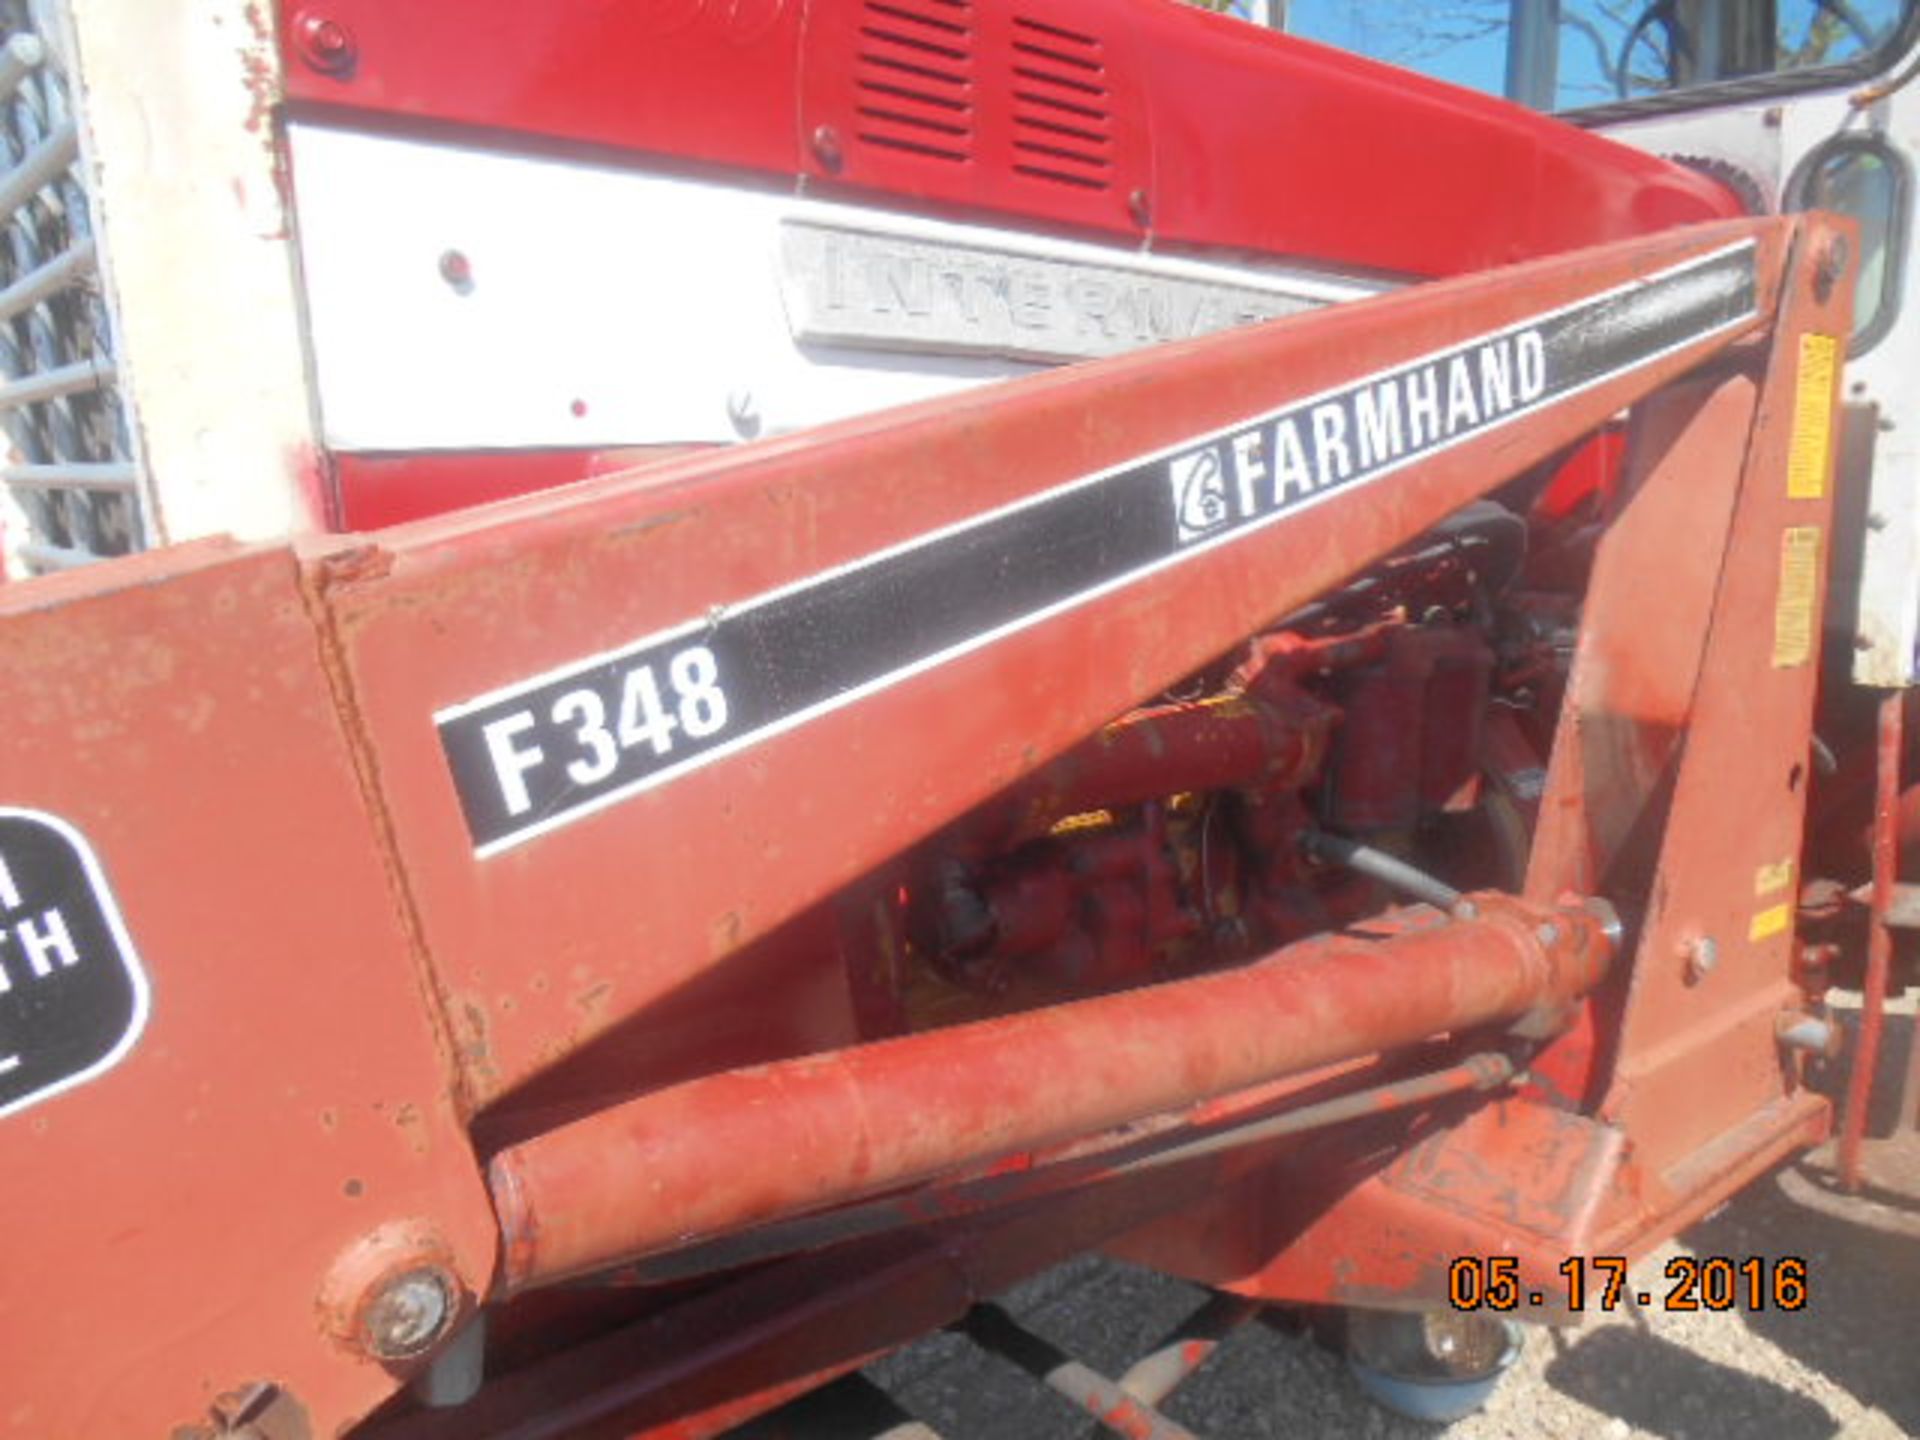 IHC 1256 Tractor (1206 motor) cab, Farmhand F348 loader - Power steering issues?? - Image 2 of 3